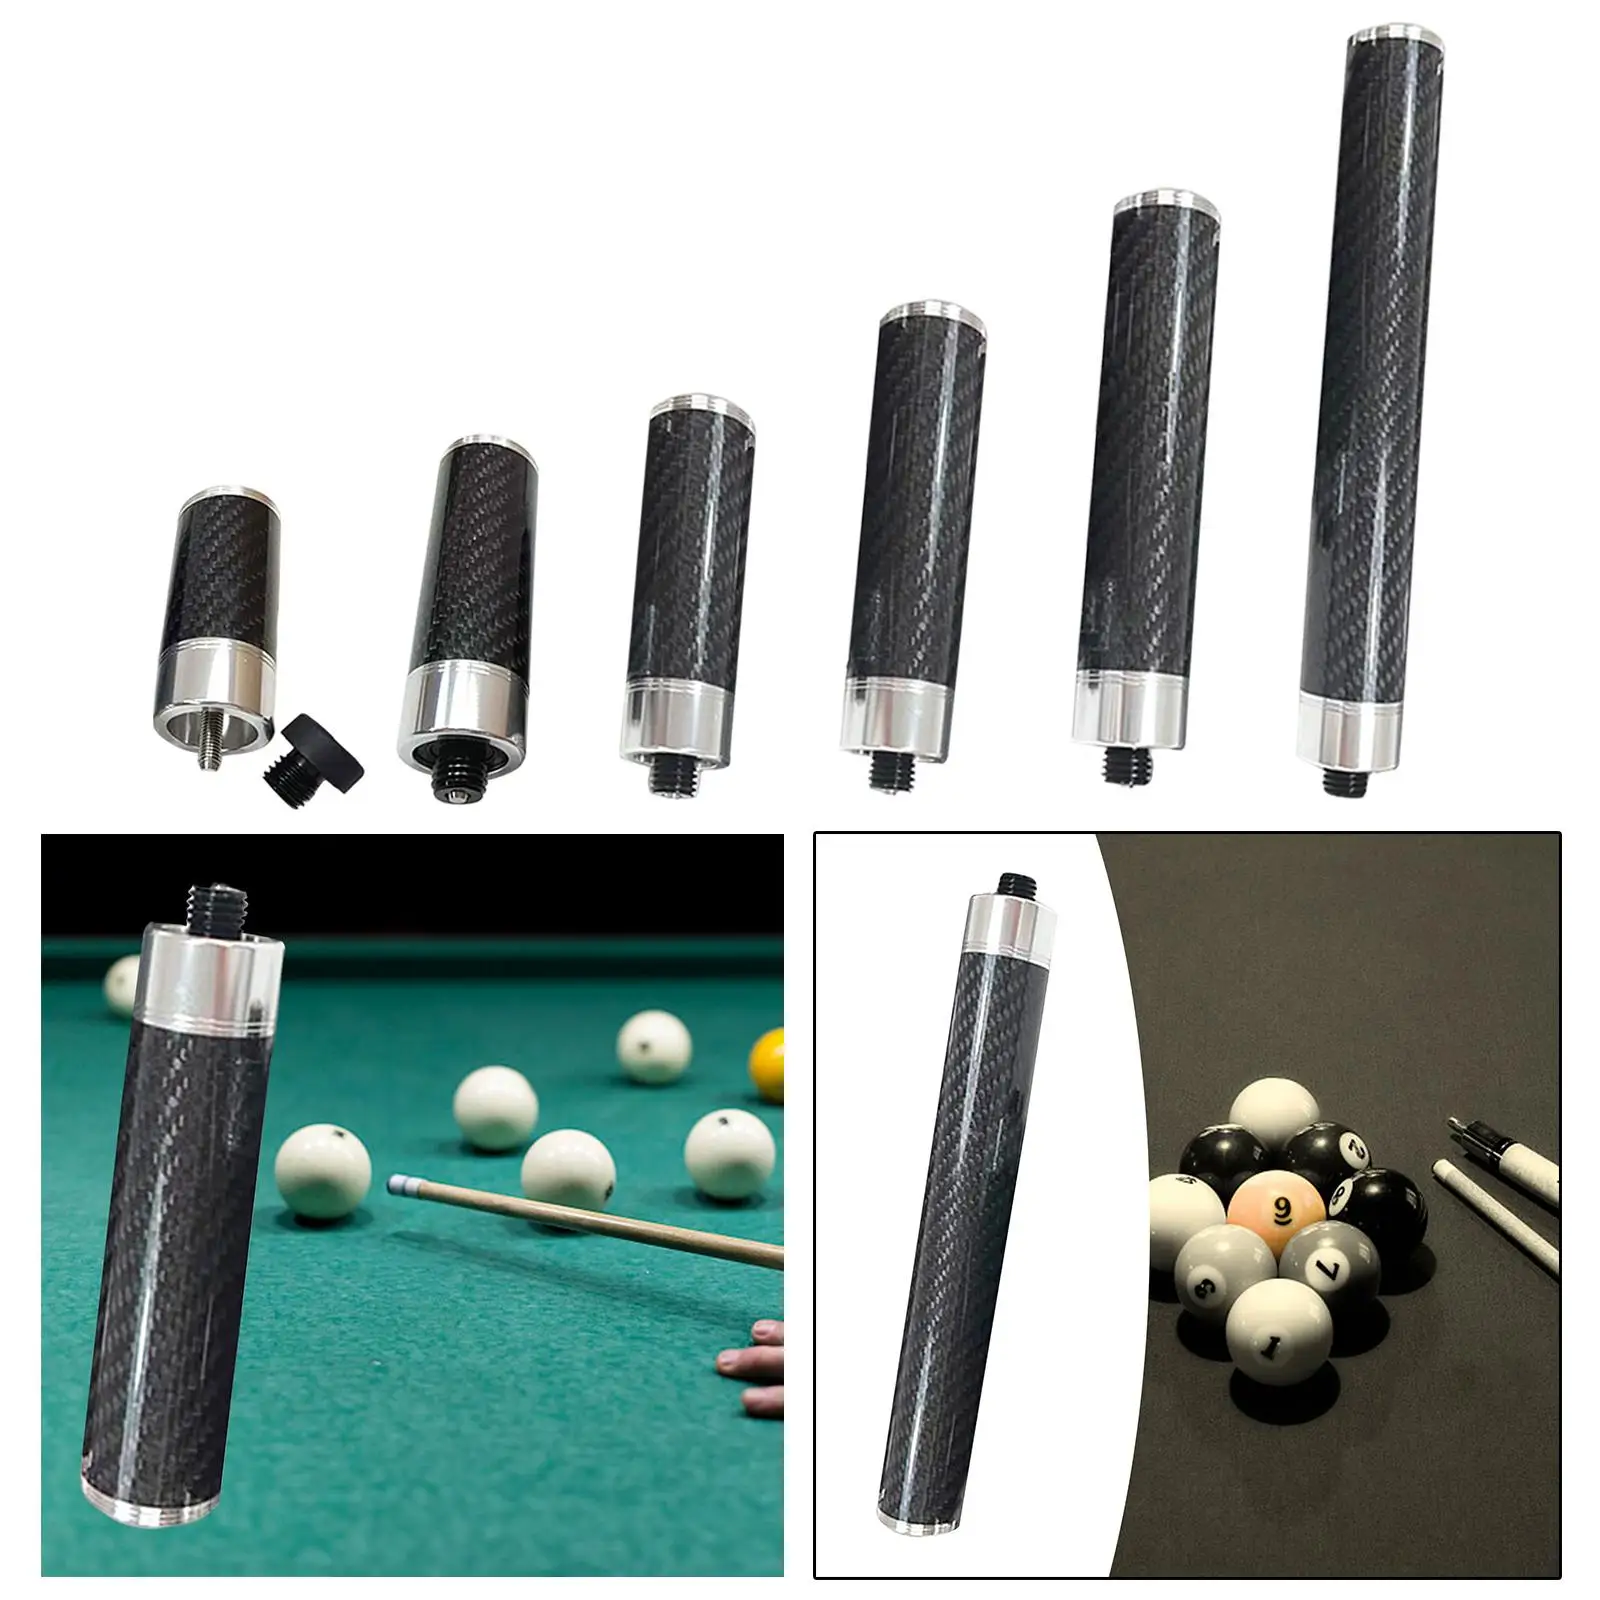 Billiards Pool Cue Extension Cue End Extended Billiard Holder Lightweight